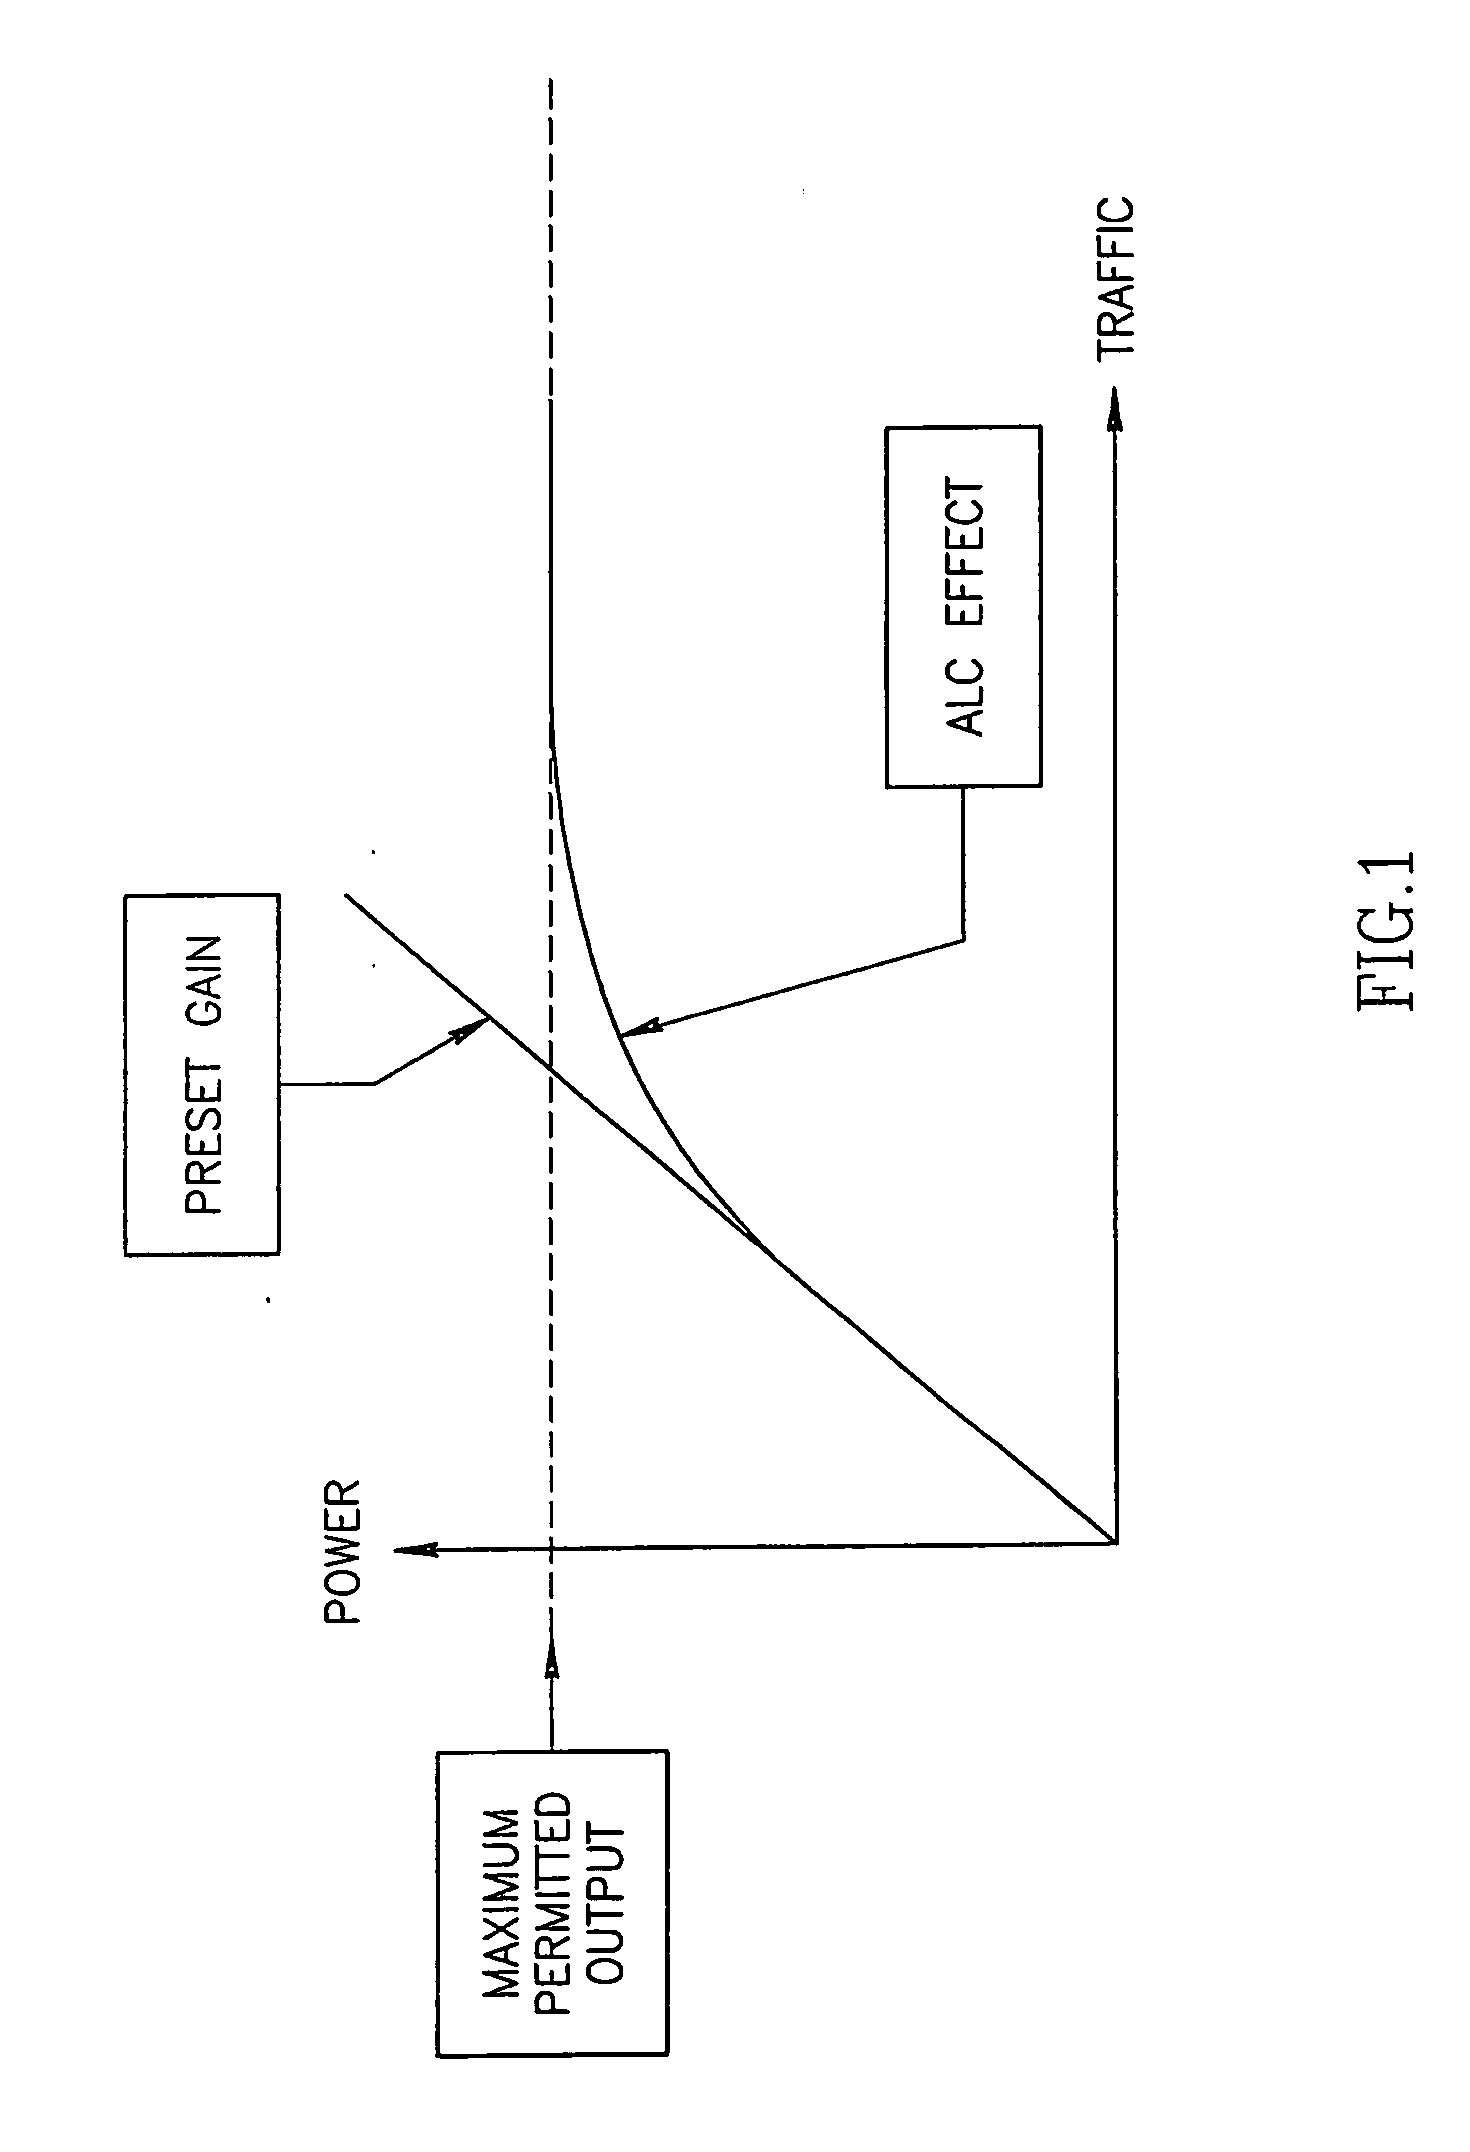 Method for automatic control of rf level of a repeater